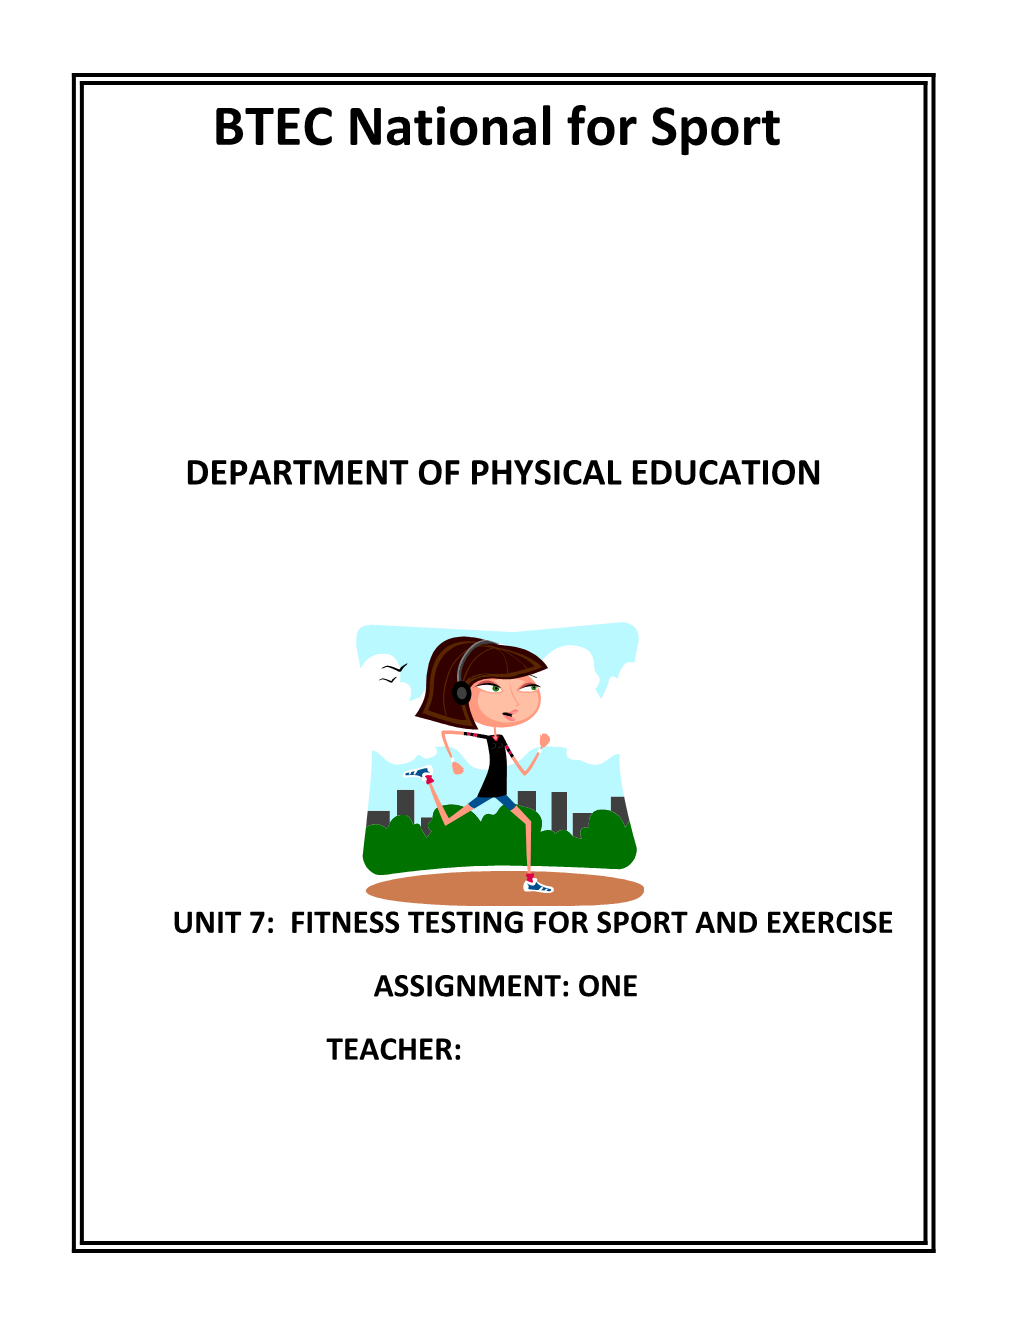 1. Know a Range of Laboratory-Based and Field-Based Fitness Tests